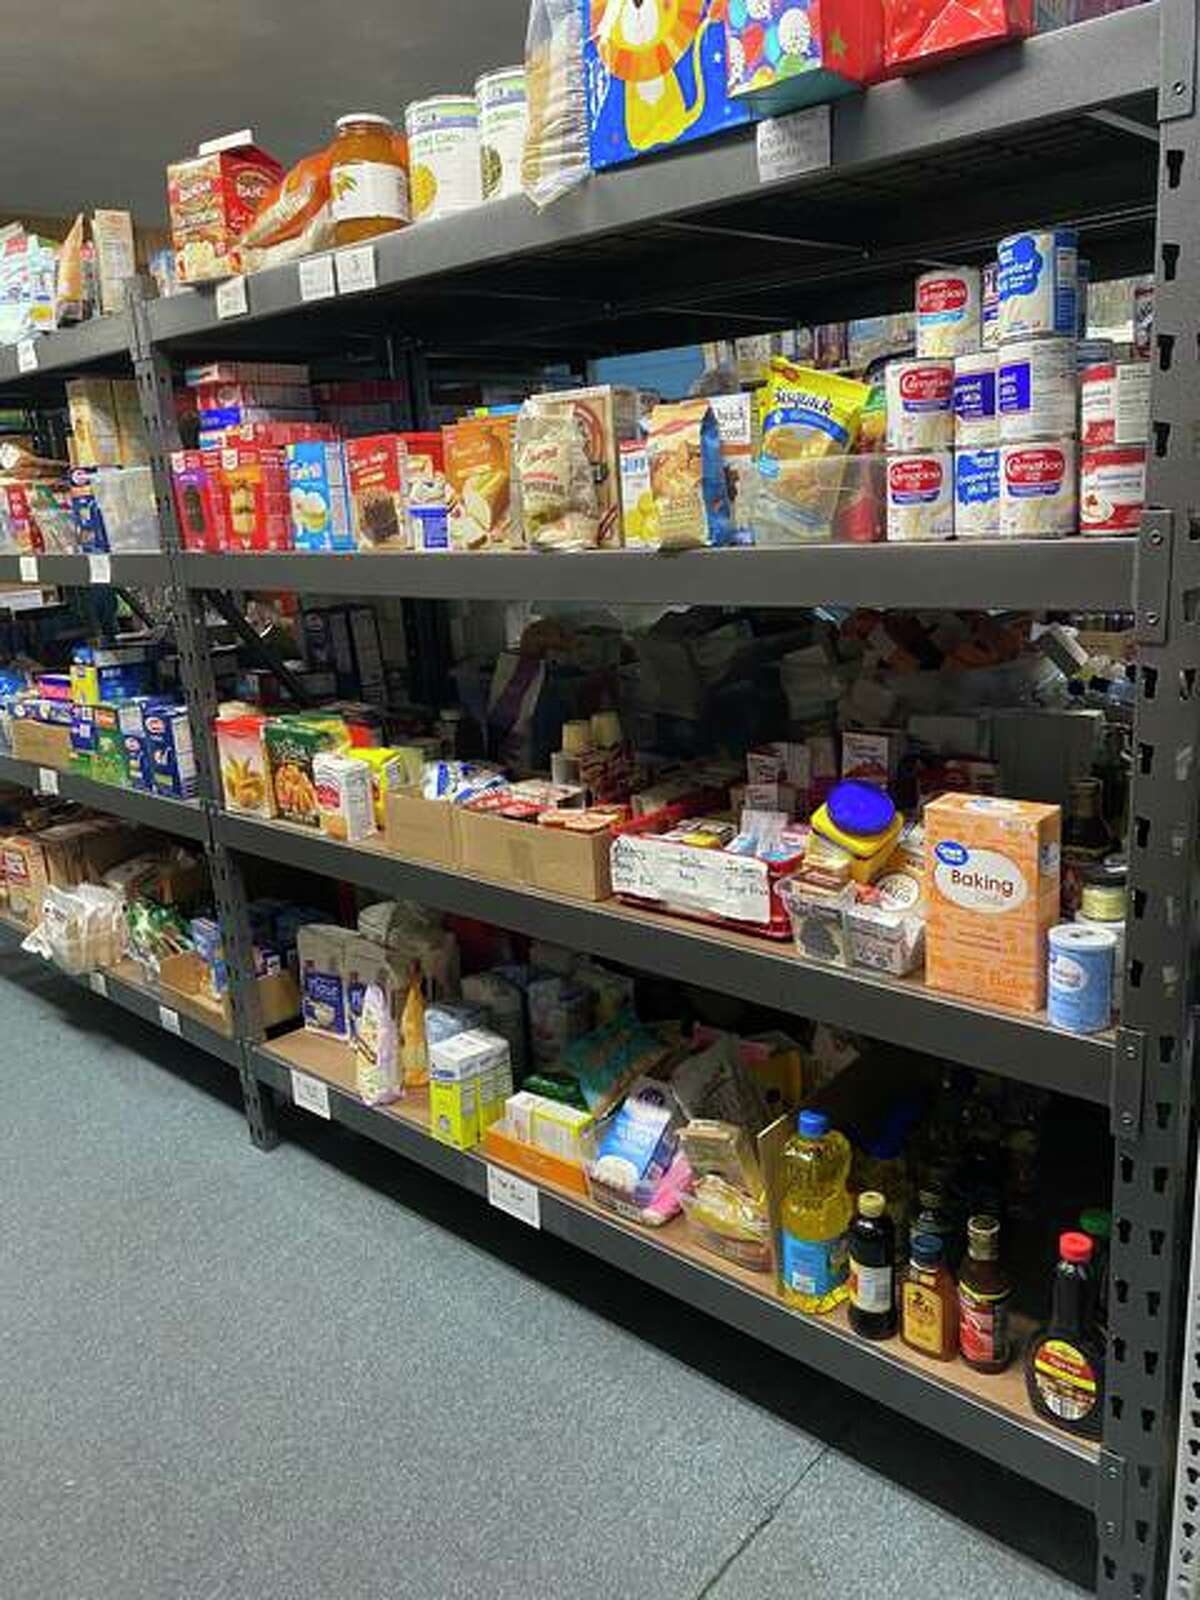 The shelves at Glen-Ed Pantry are currently full of food and other items, but Jane Ahasay, director of development for the the pantry, wants to make sure the shelves will remain full beyond the holidays.